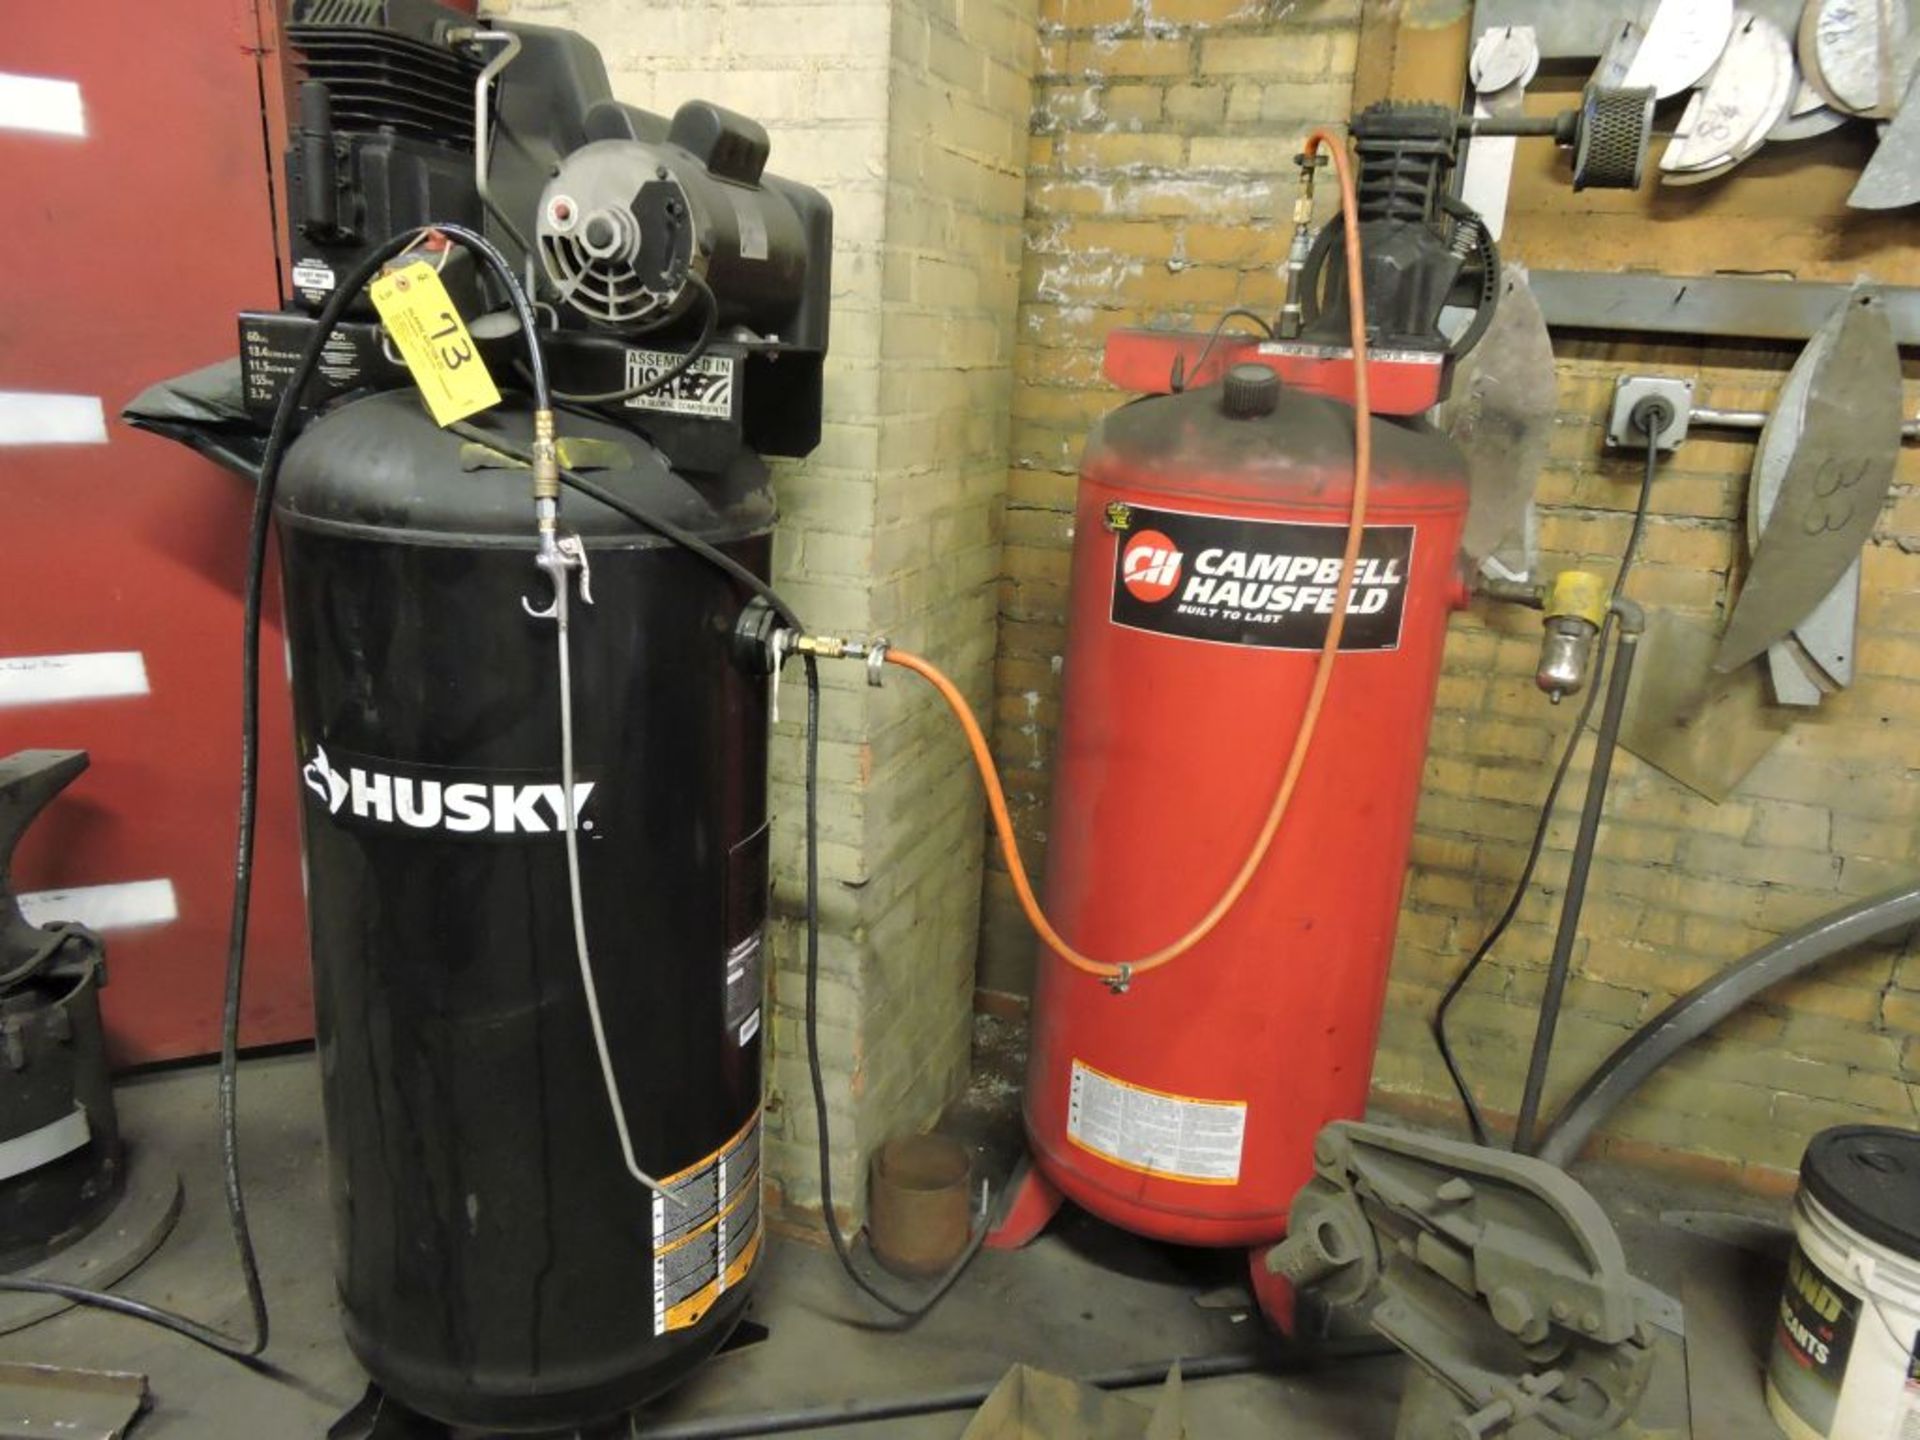 Husky and Campbell Hausfeld air compressors.